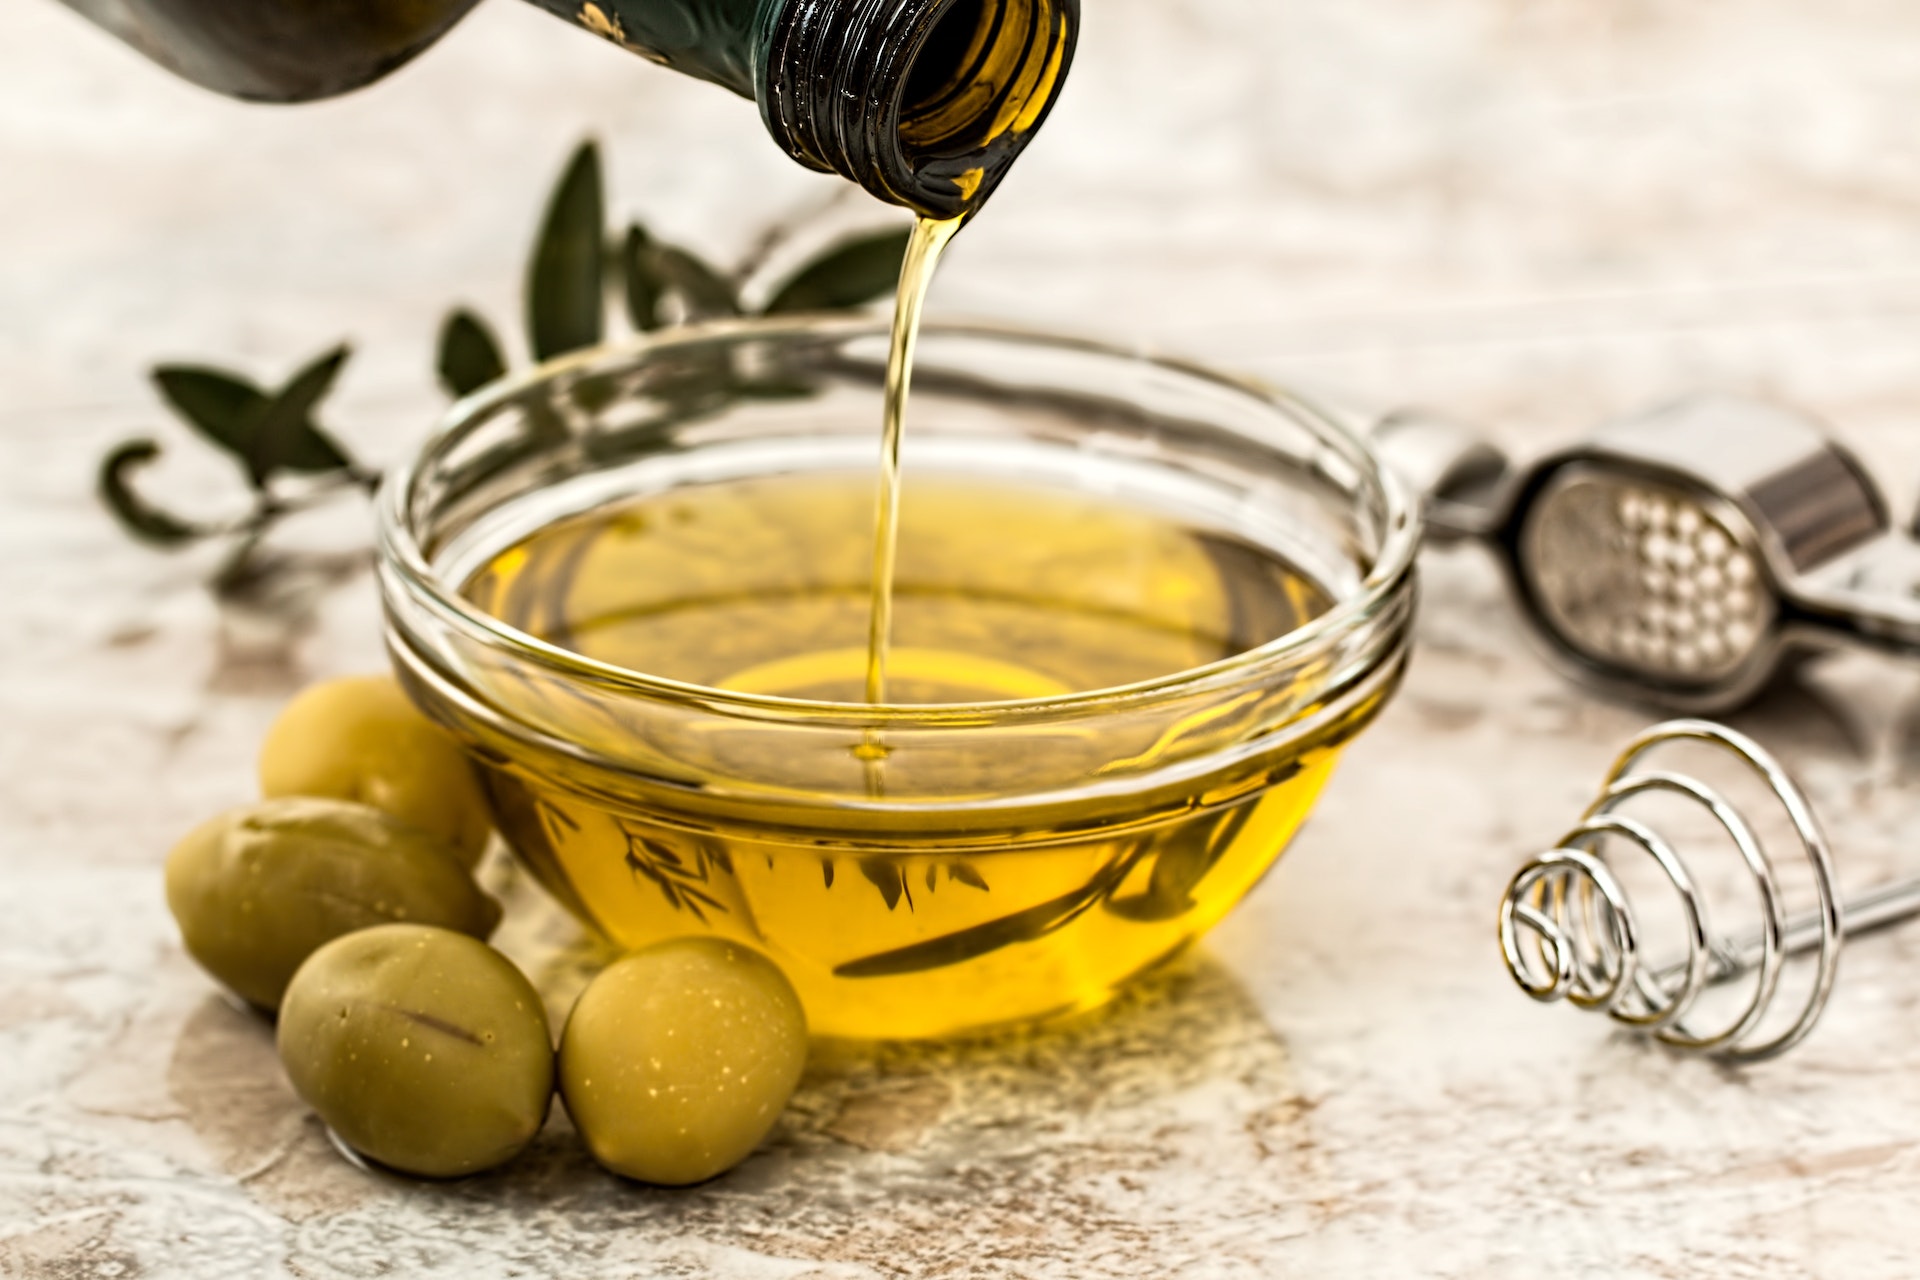 Top 9 Natural Oils for Improving Hair Health